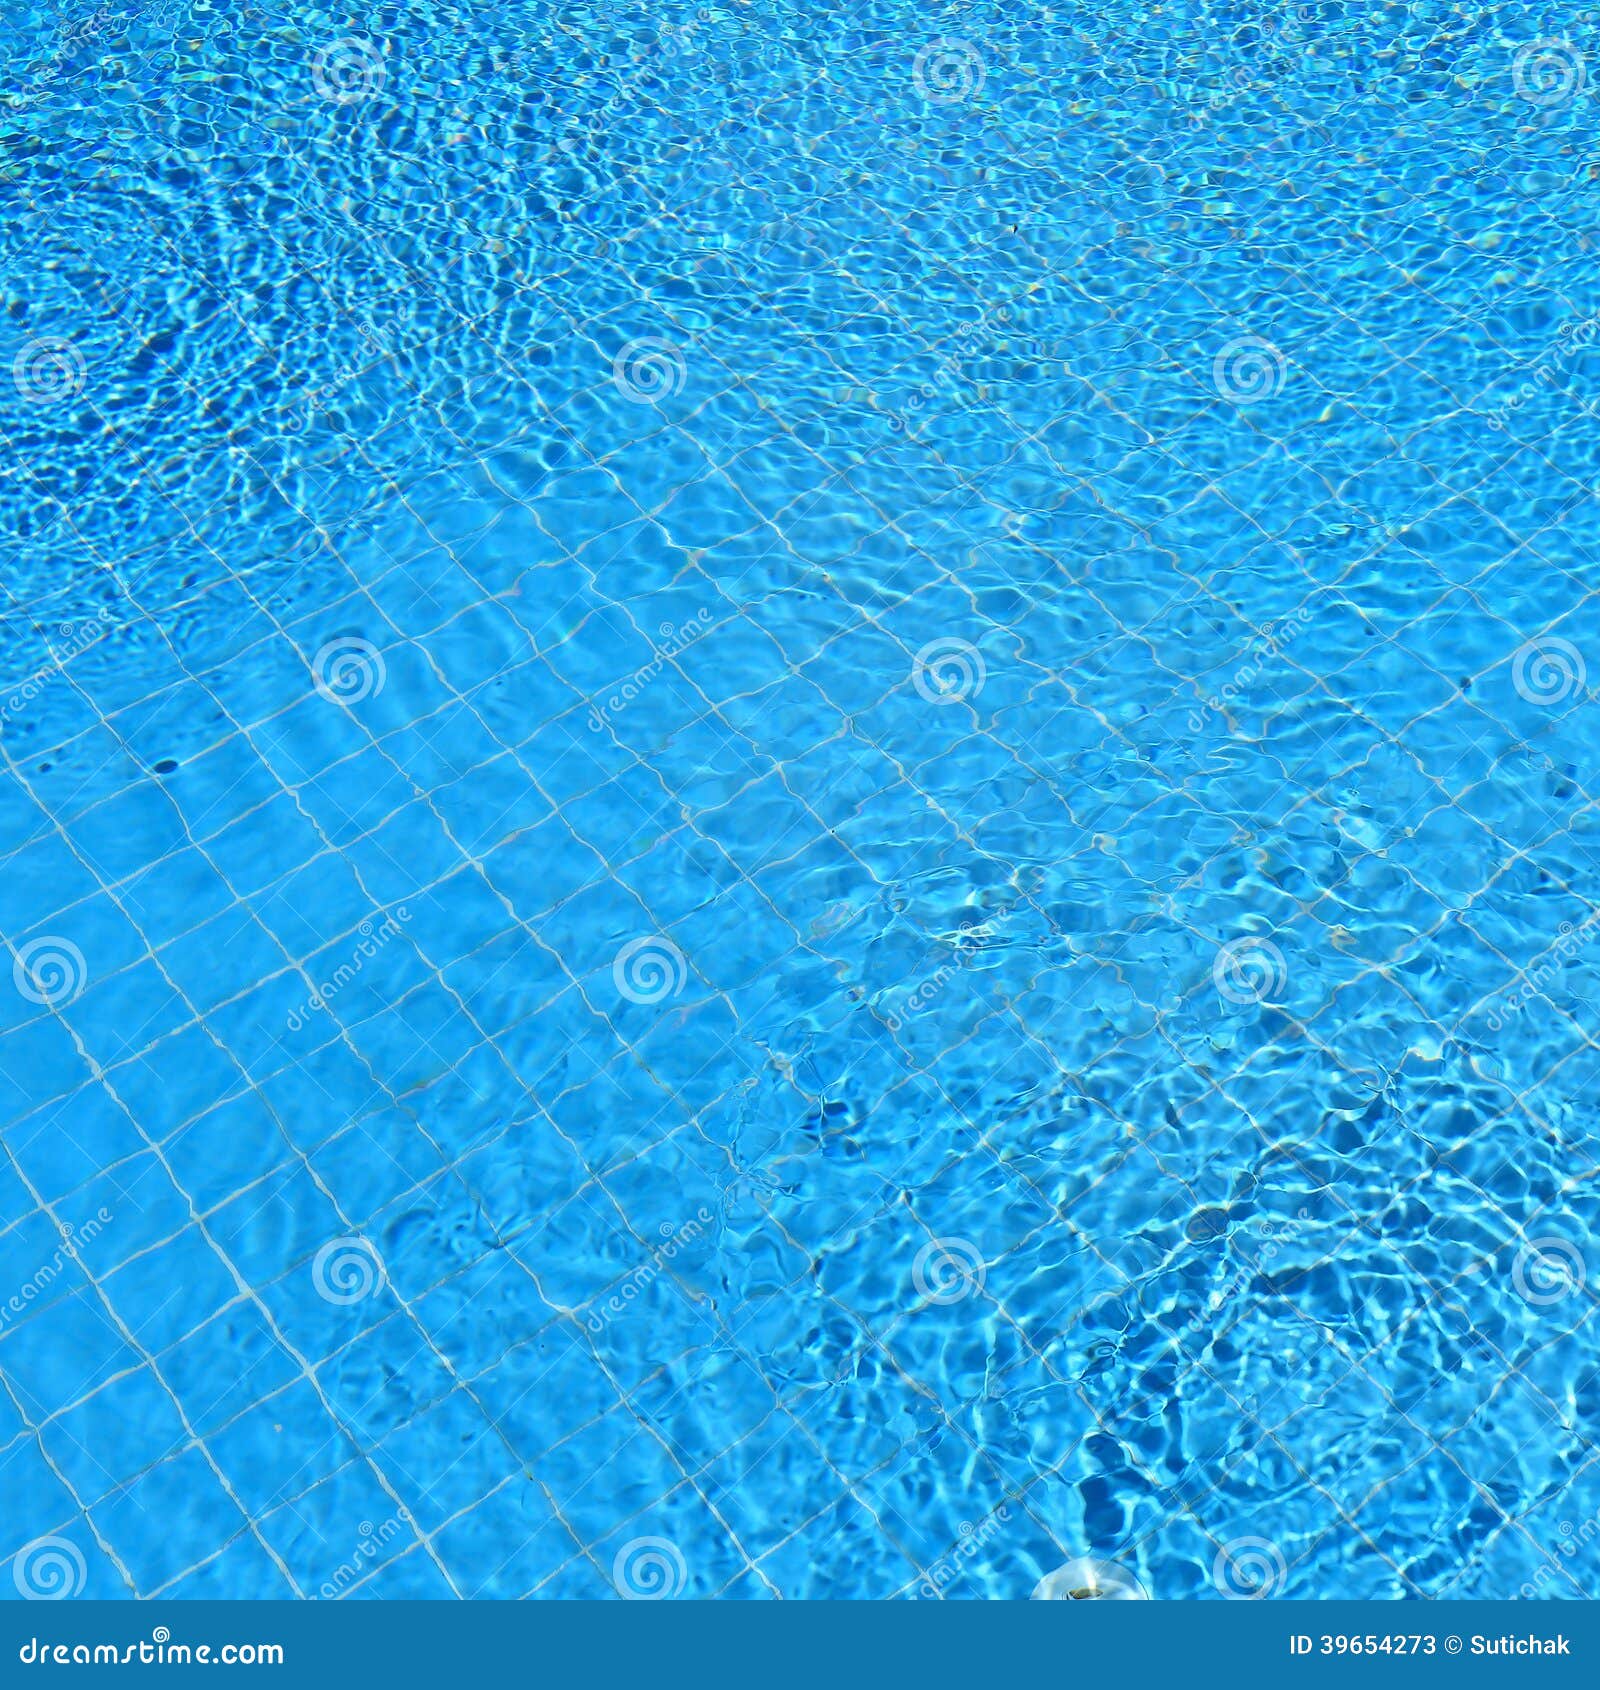 Abstract blue ripple water in swimming pool